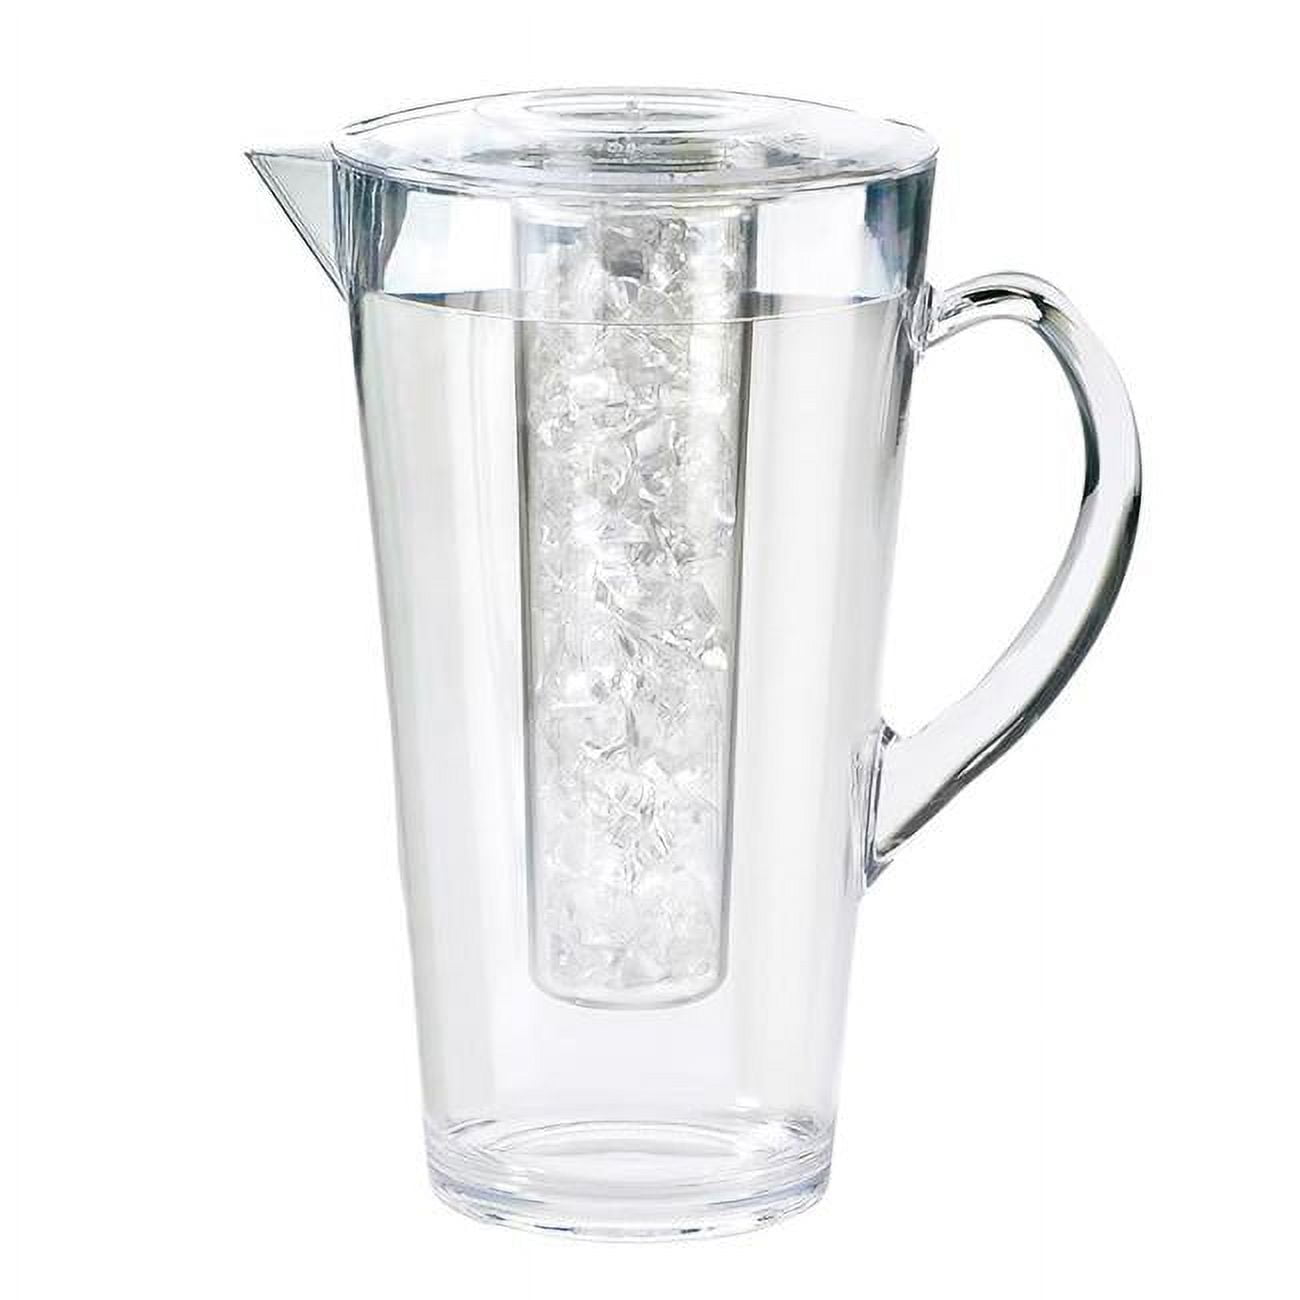 Picture of Cal Mil 682-ICE 2 ltr Polycarbonate Pitcher with Ice Chamber - 9X9 x 10 in.